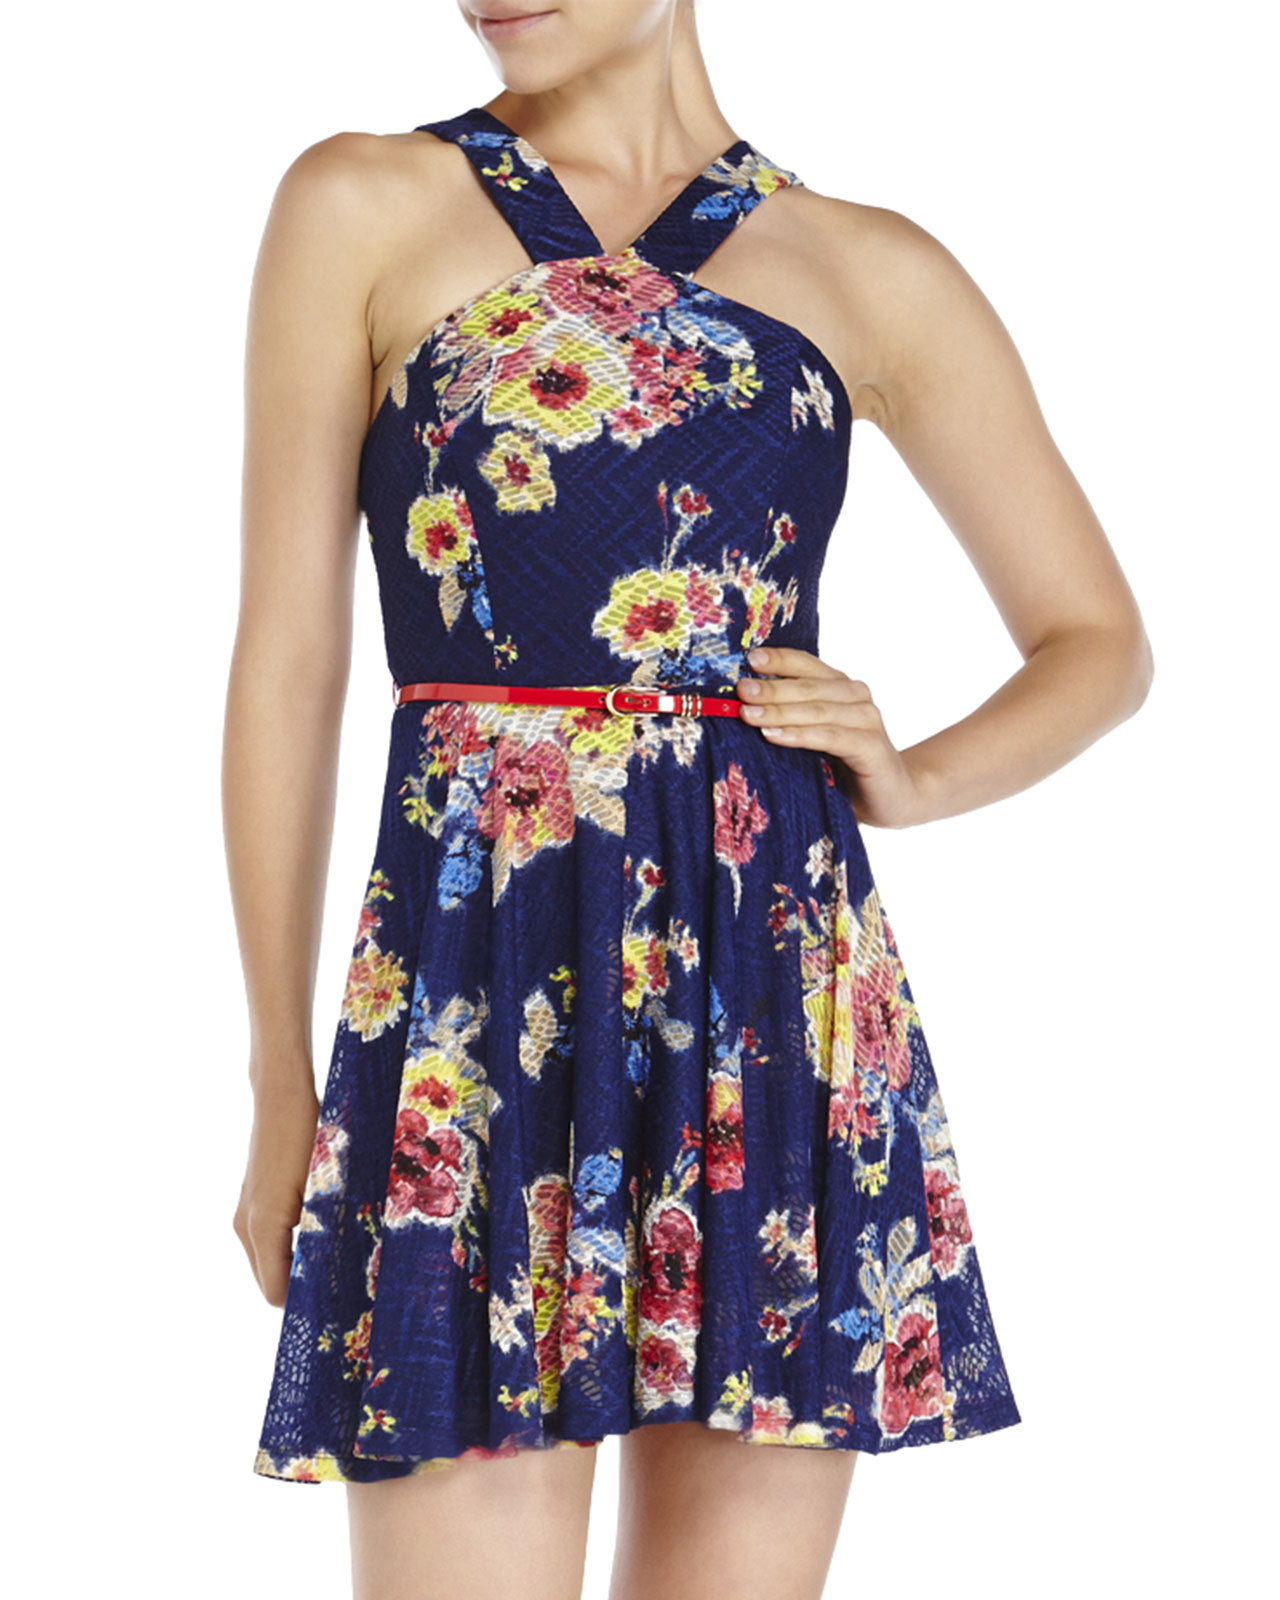 Lyst - City Triangles Belted Floral Fit & Flare Dress in Blue